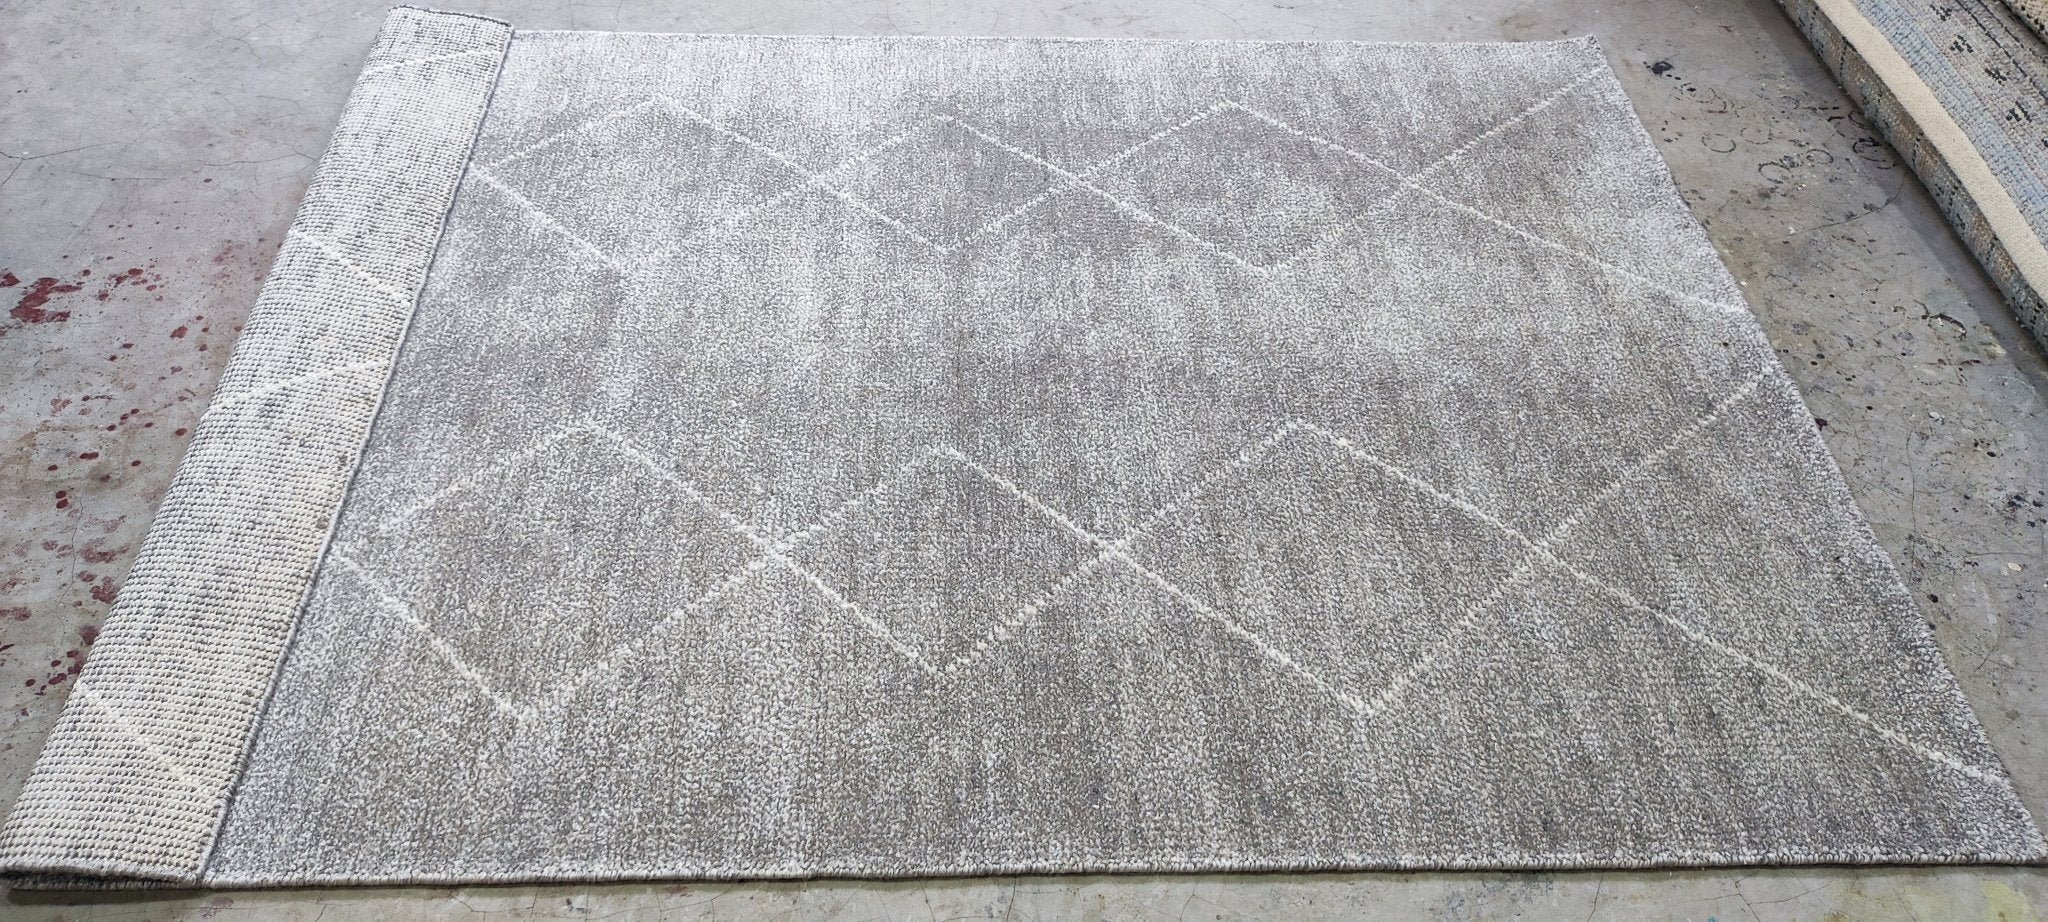 Aldo 4.6x6.6 Handwoven Blended Textured Durrie | Banana Manor Rug Factory Outlet